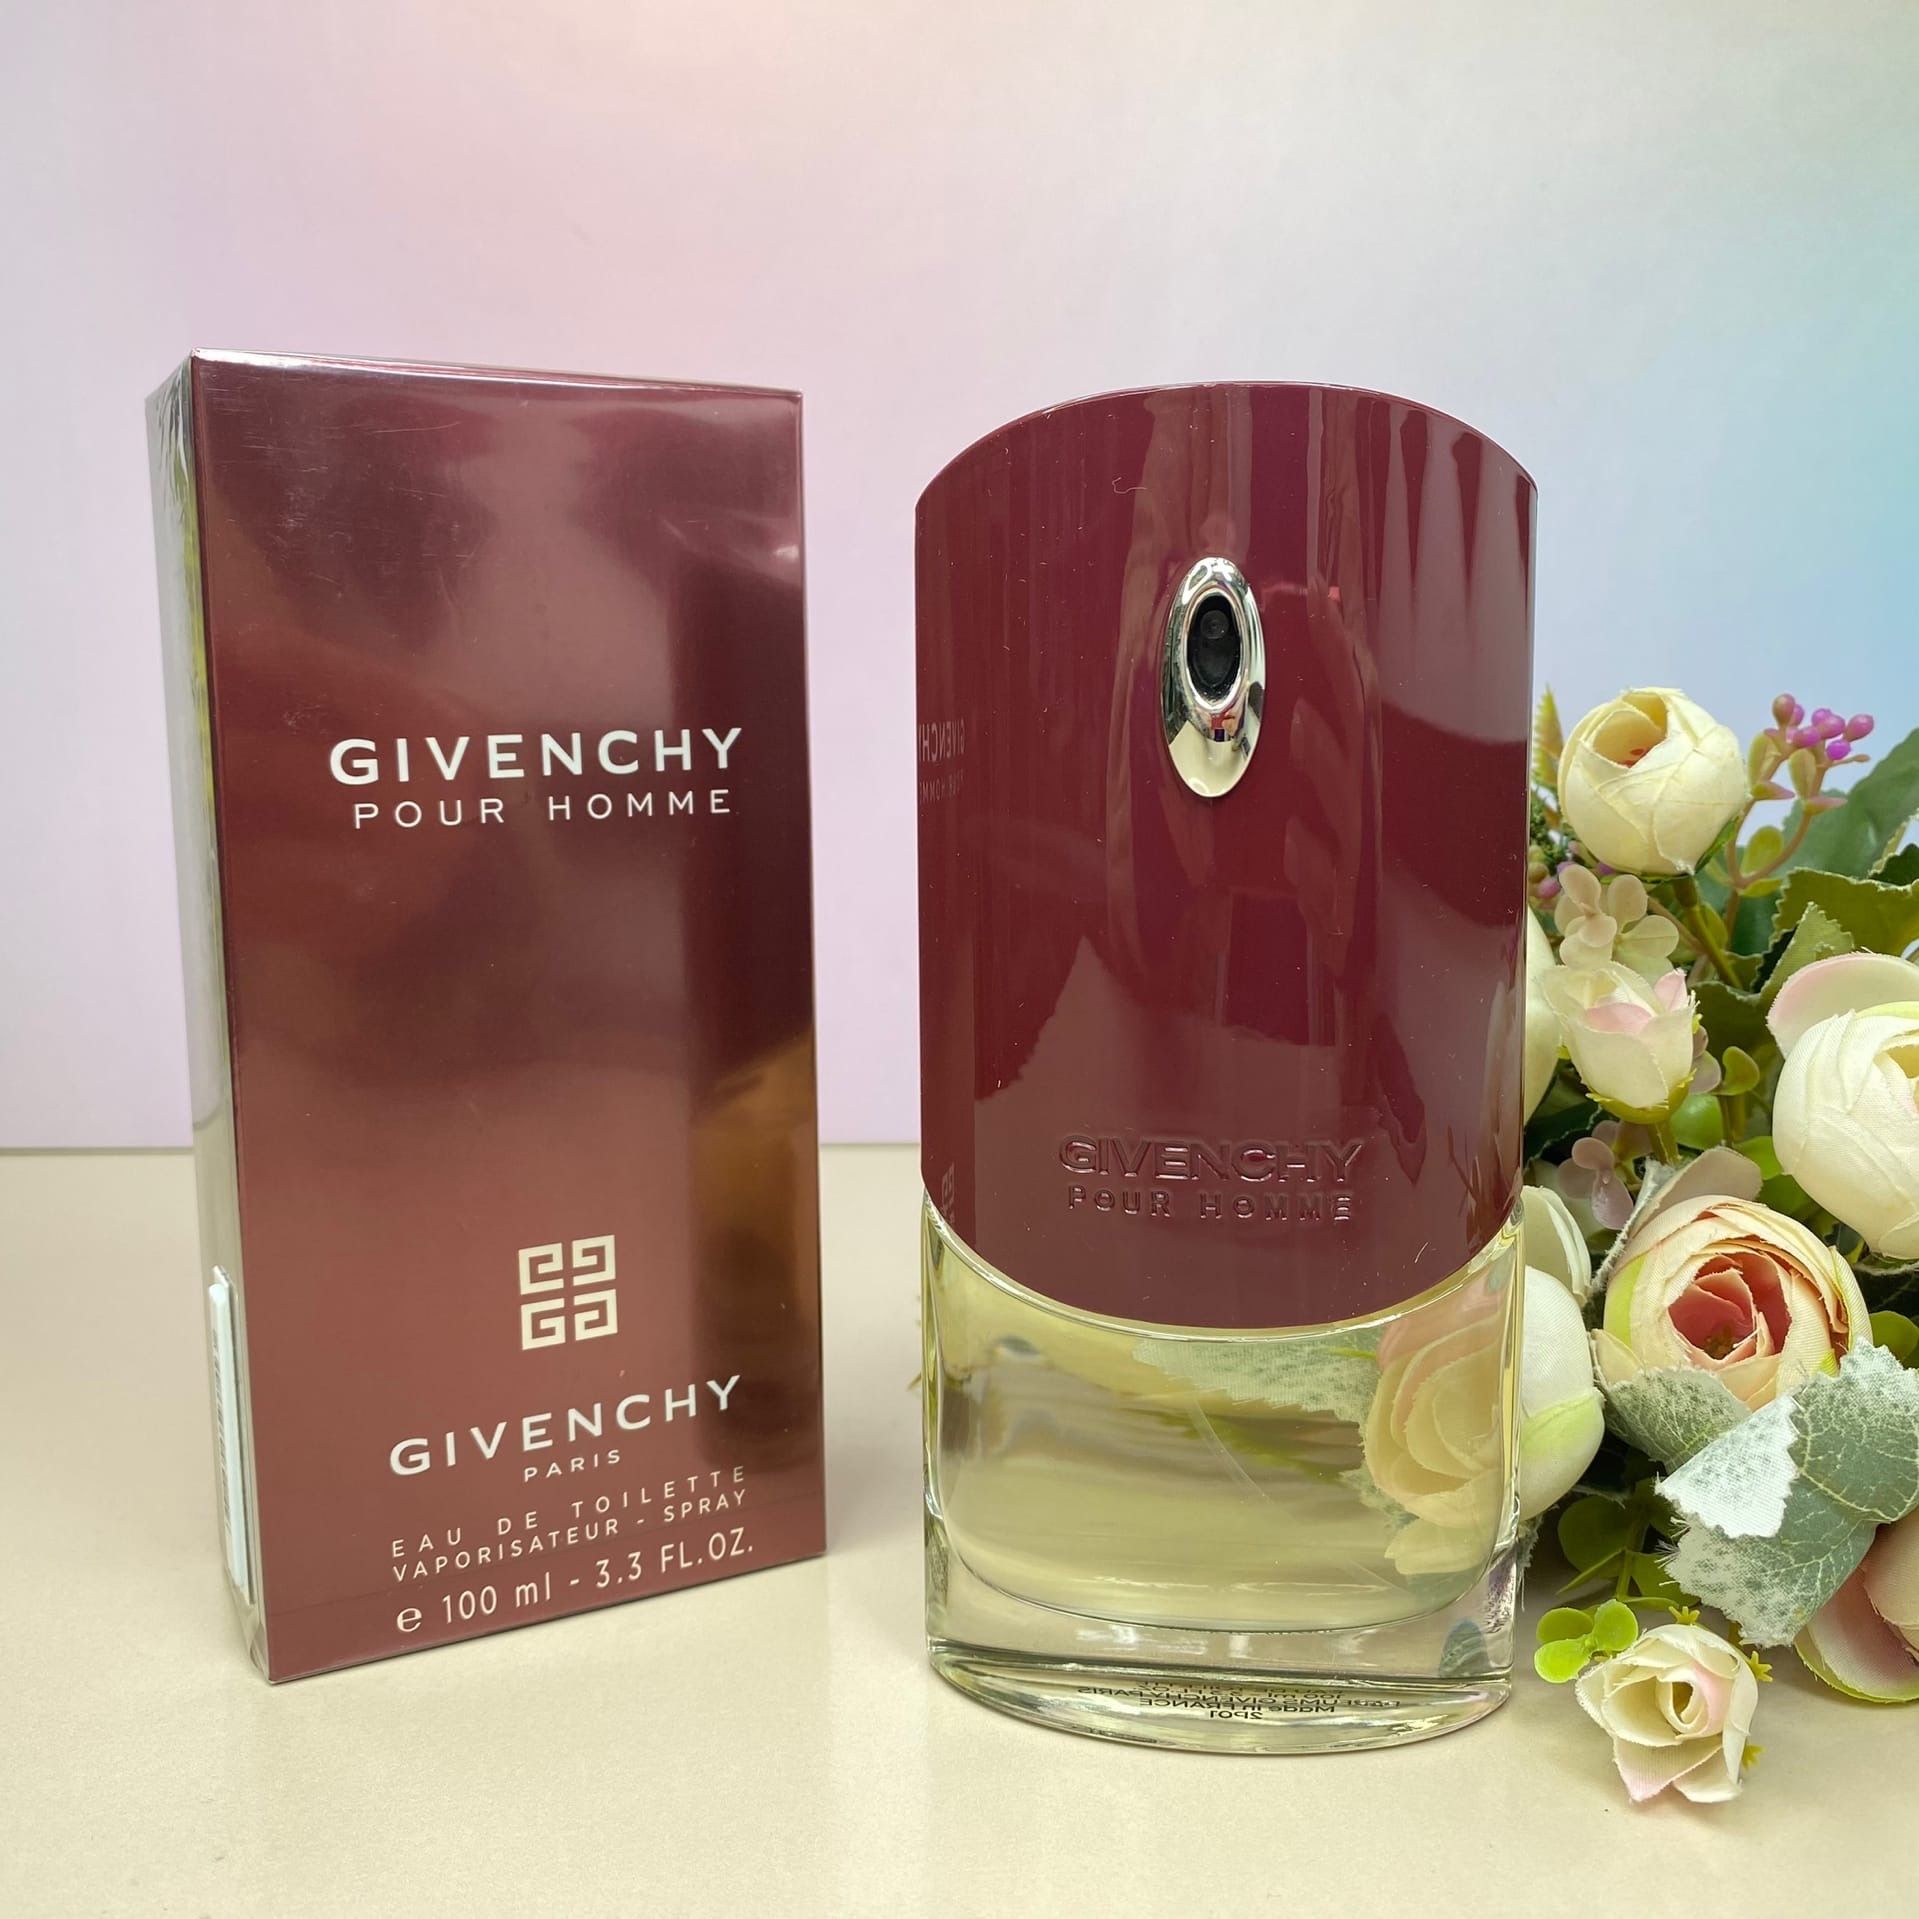 Туалетная вода Givenchy Givenchy pour homme. Туалетная вода Givenchy pour homme производитель. Аромат Givenchy code. Givenchy духи древесные ароматы. Туалетная вода givenchy givenchy pour